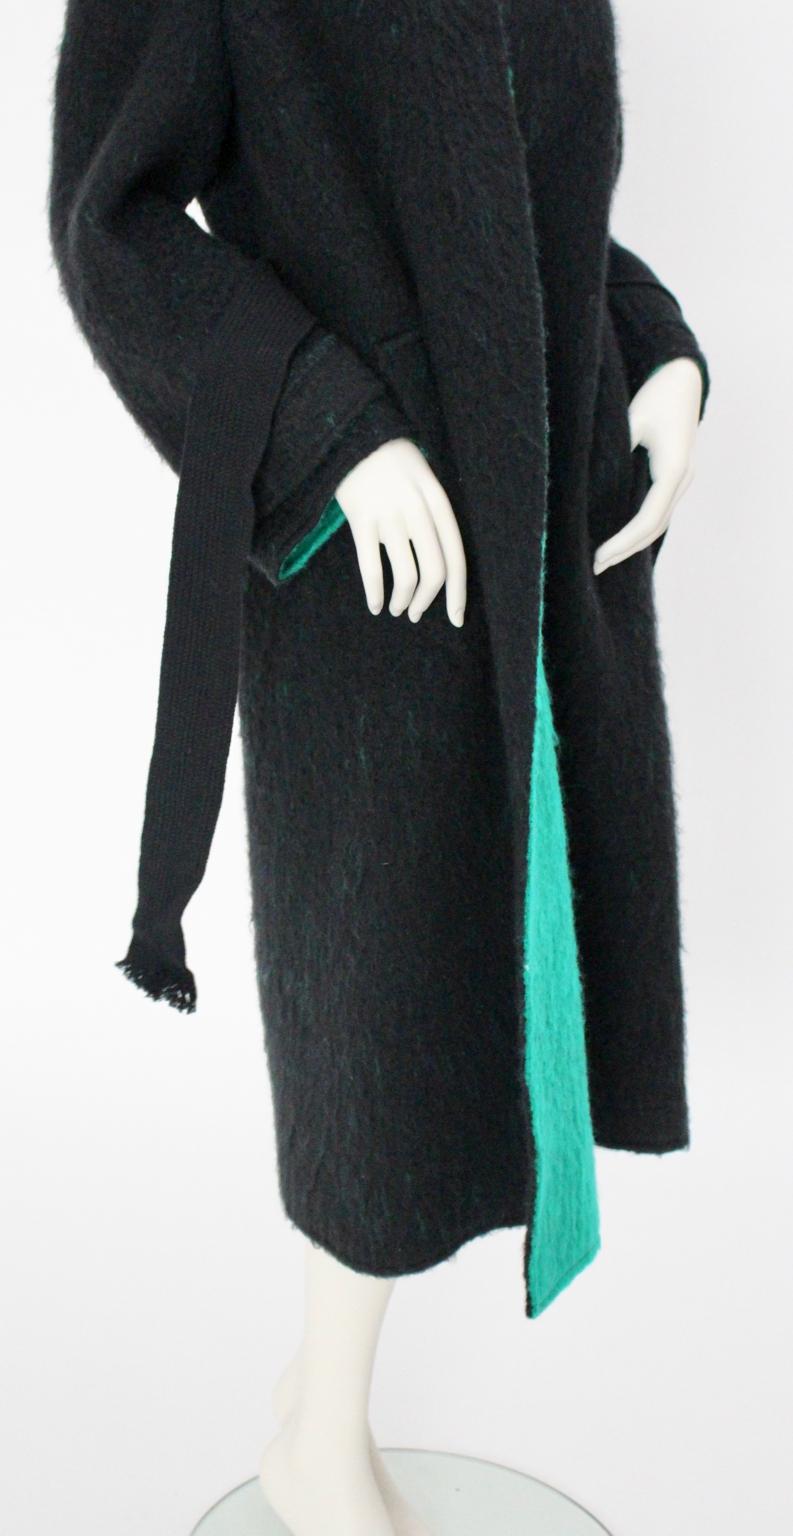 Lancetti Roma Vintage Black and Green Wool Coat 1970s For Sale 2